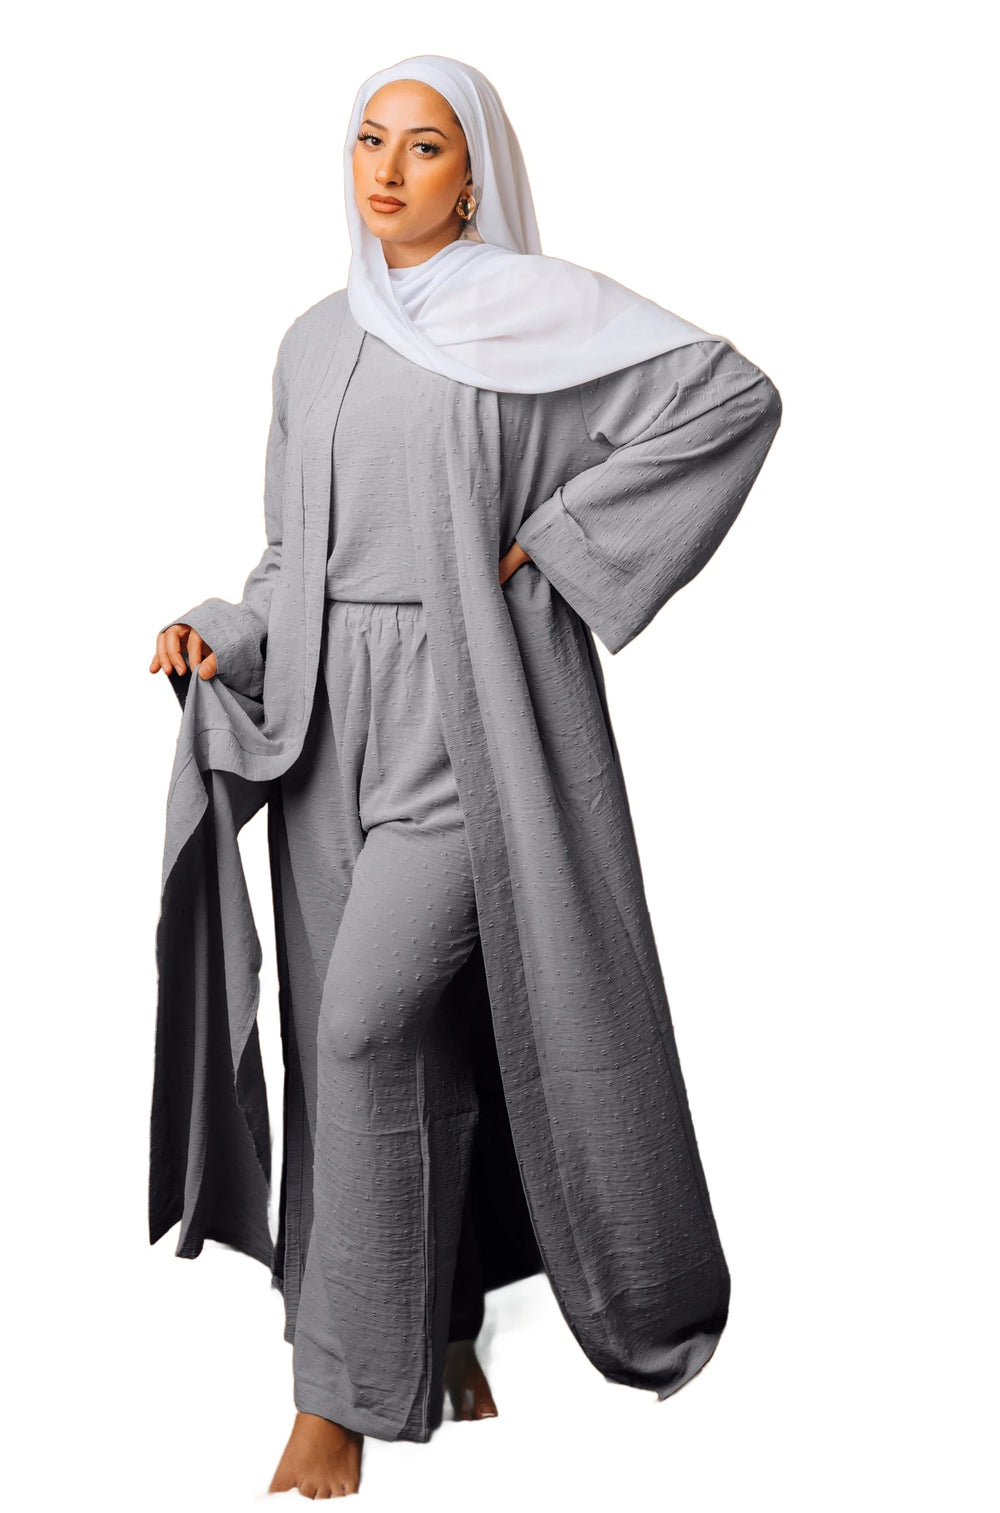 a woman in a nun costume posing for a picture